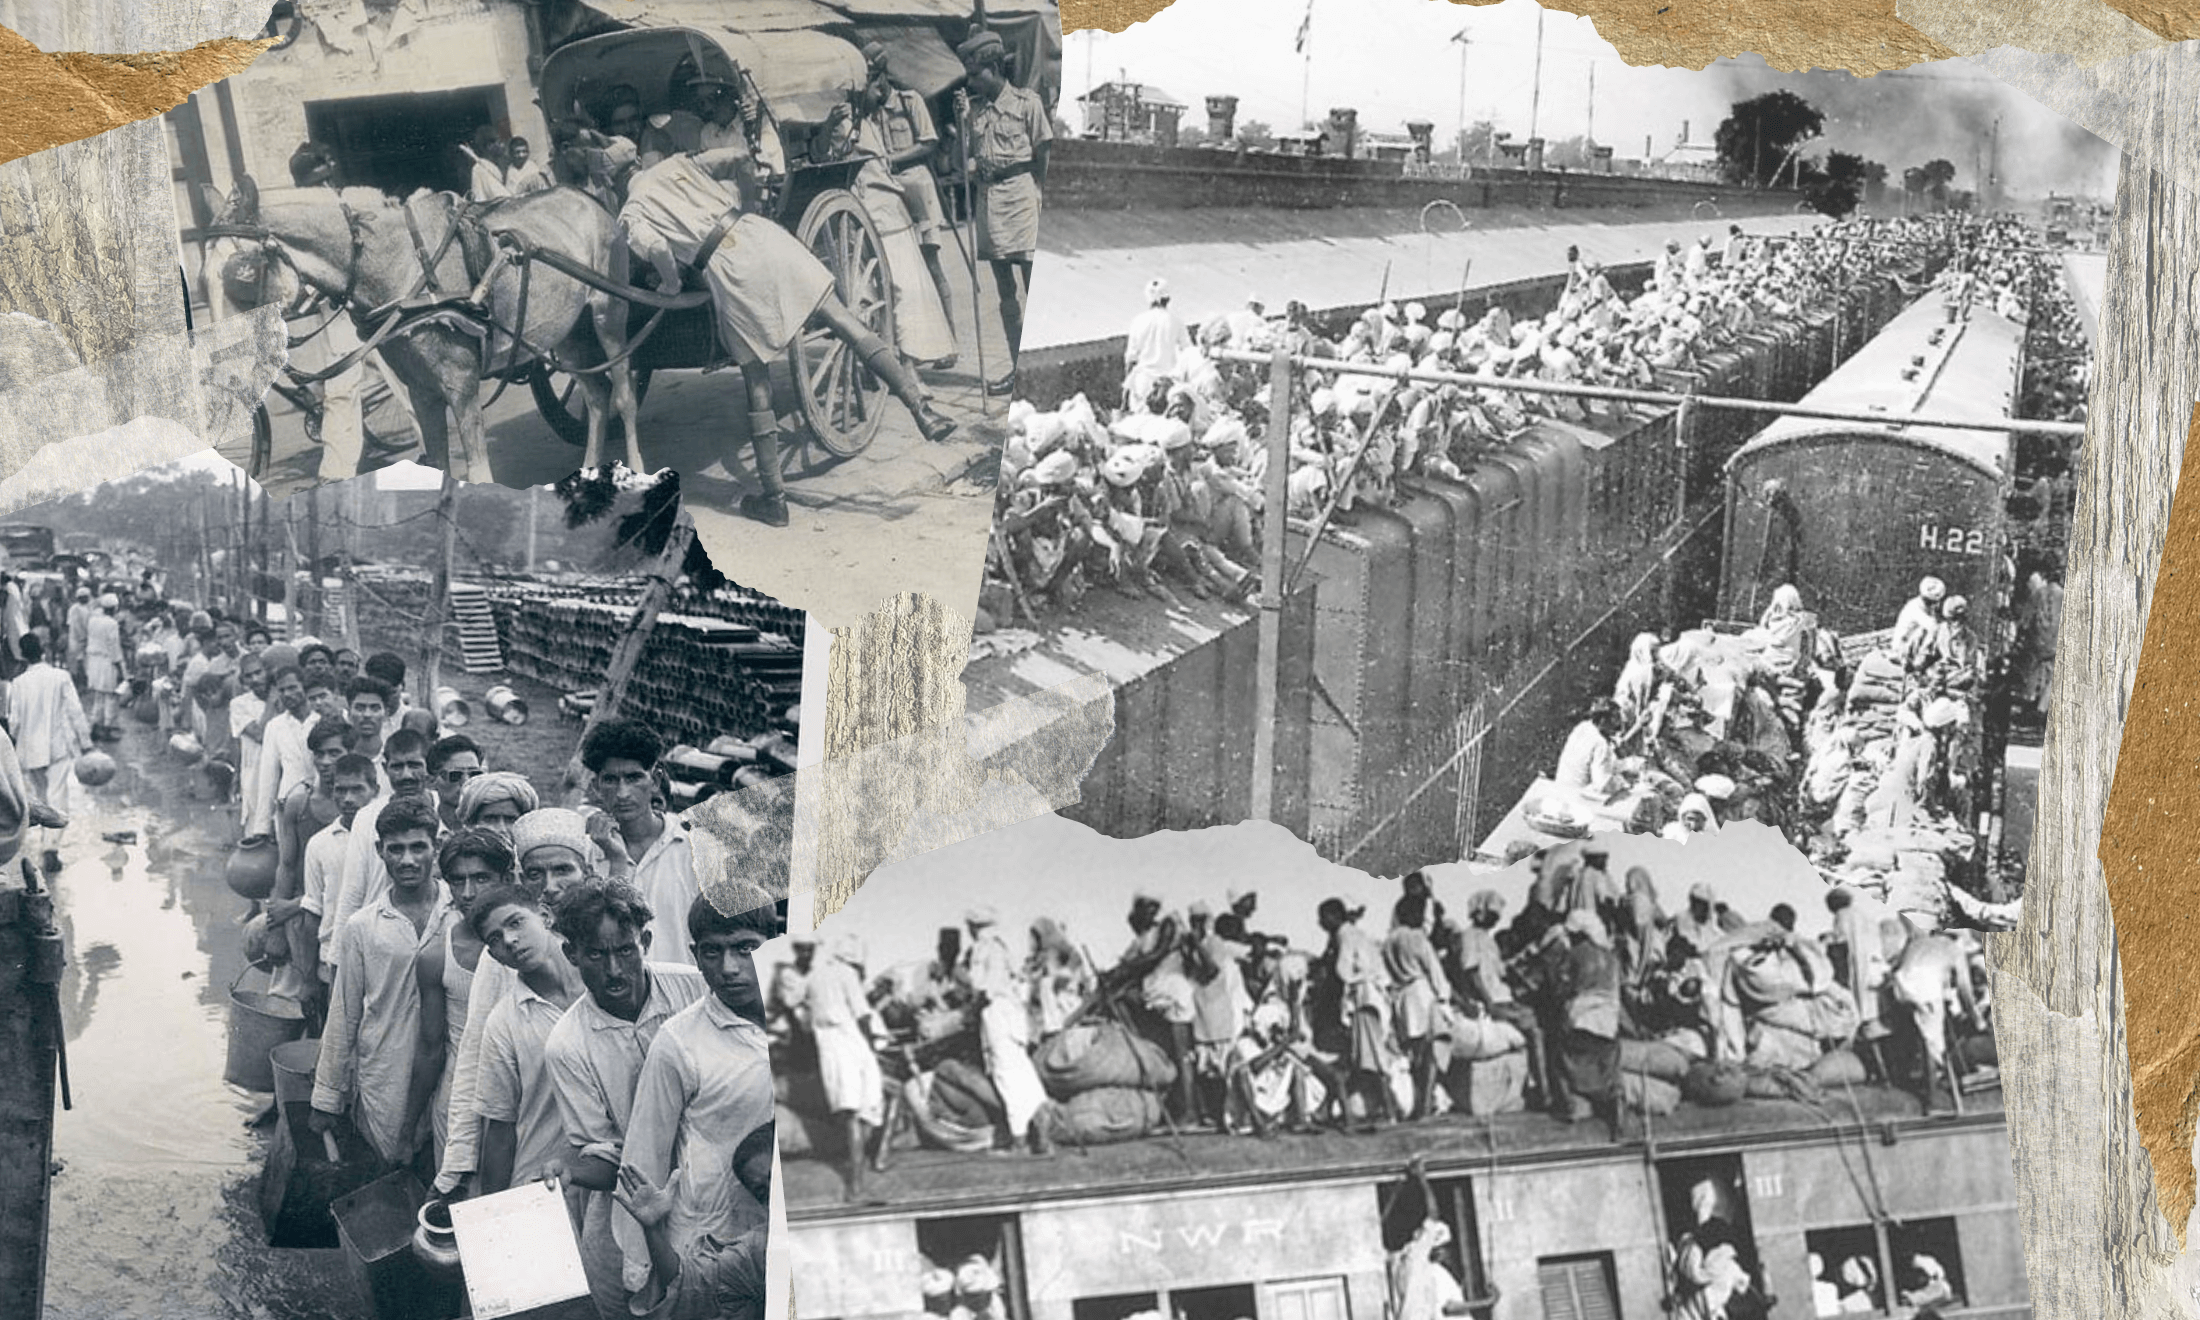 ‘The other side’: Remembering Partition 75 years on